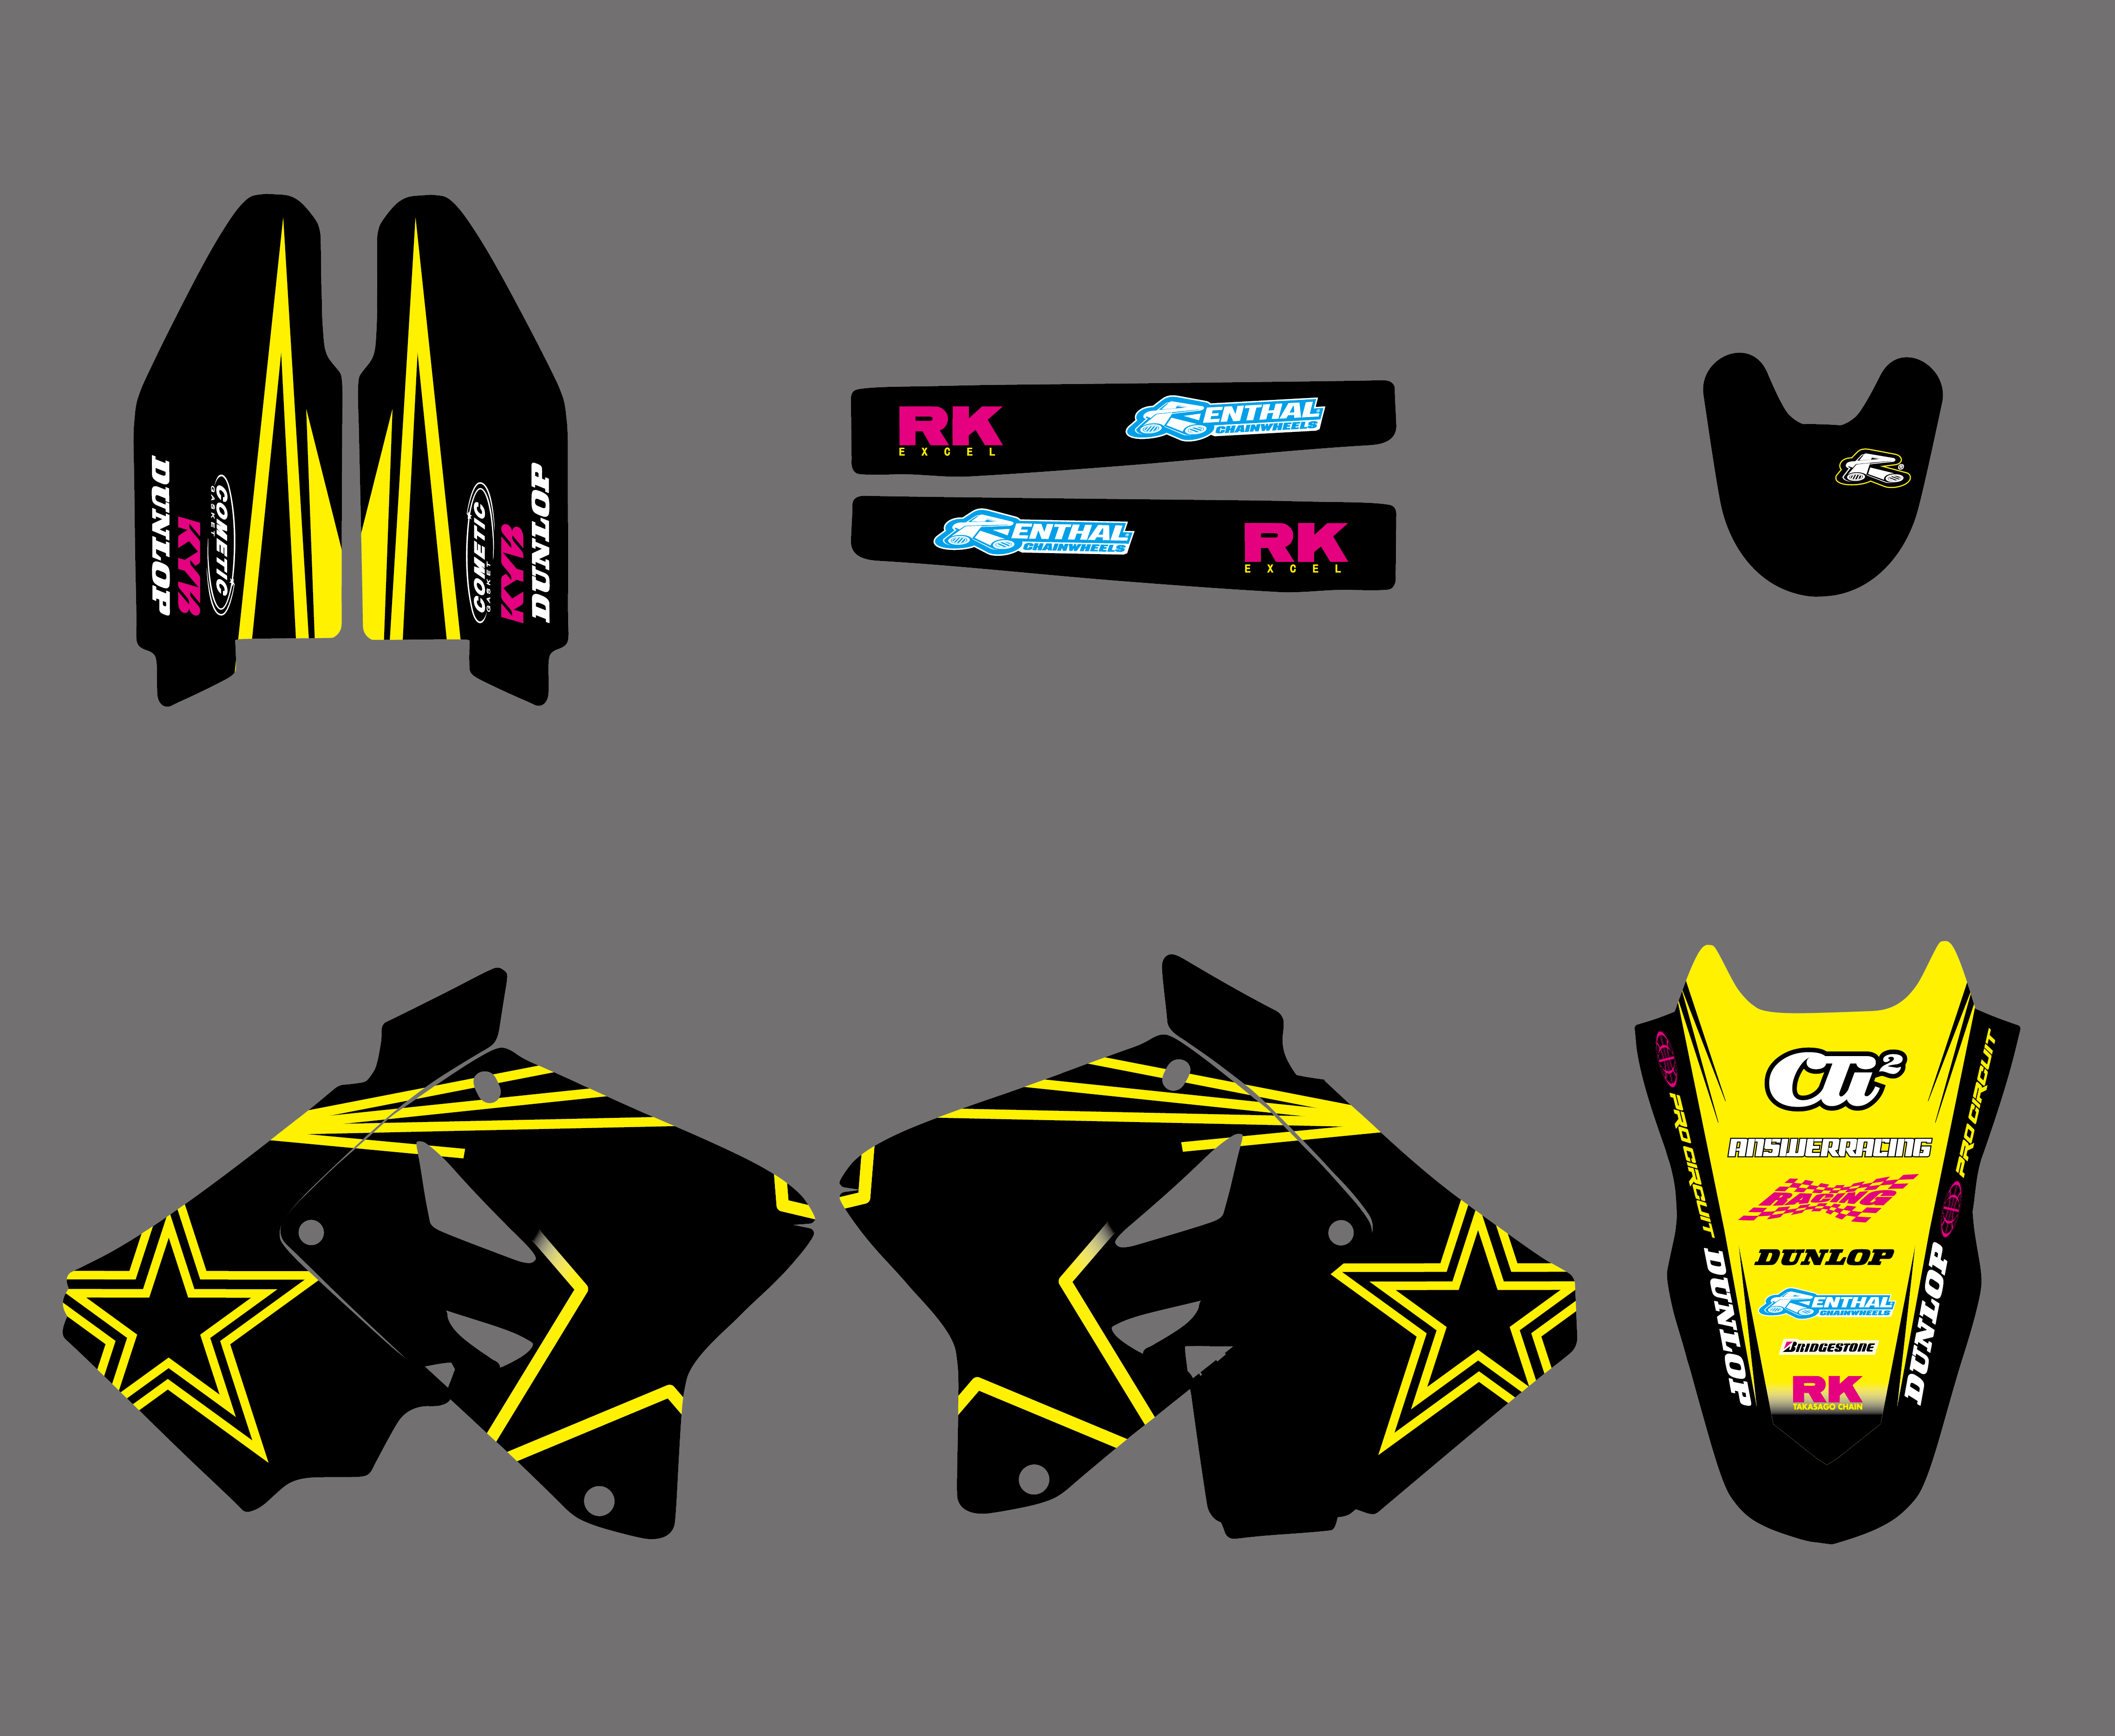 Motorcycle Graphic Decals And Stickers Kit For Suzuki RM125 RM250 RM 125 250 2001 2002 2003 2004 2005 2006 2007-2012